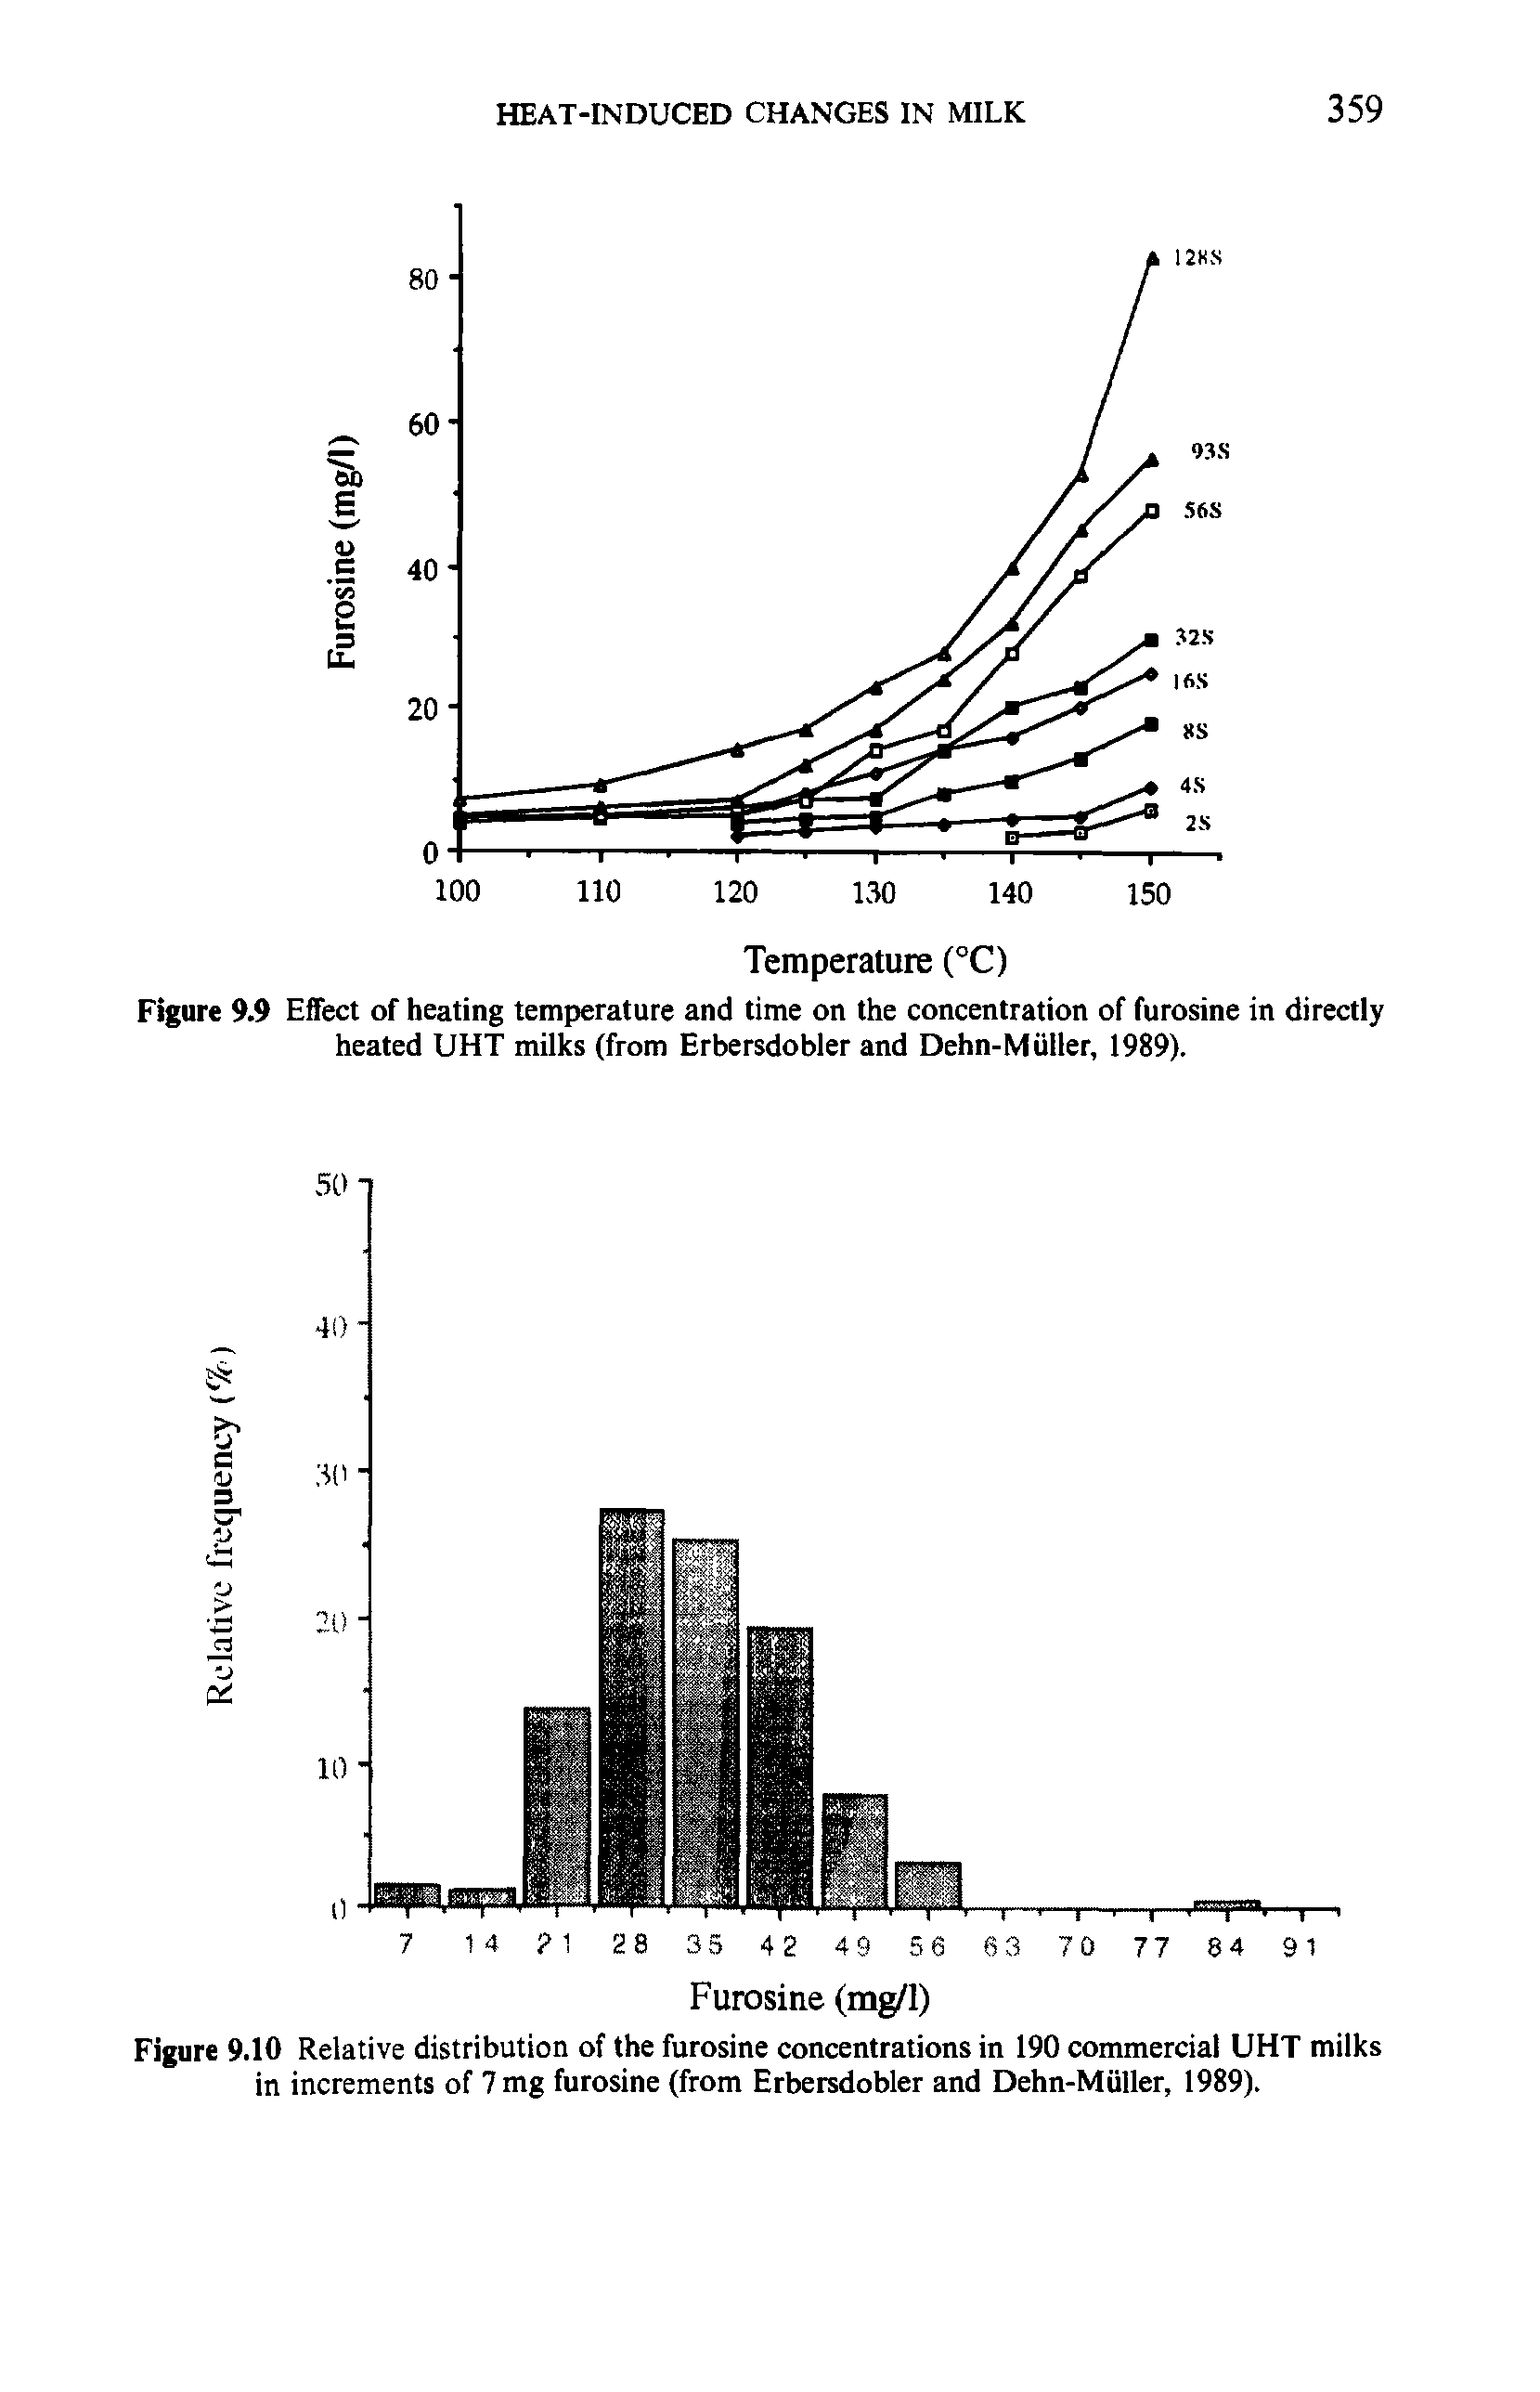 Figure 9.9 Effect of heating temperature and time on the concentration of furosine in directly heated UHT milks (from Erbersdobler and Dehn-Miiller, 1989).